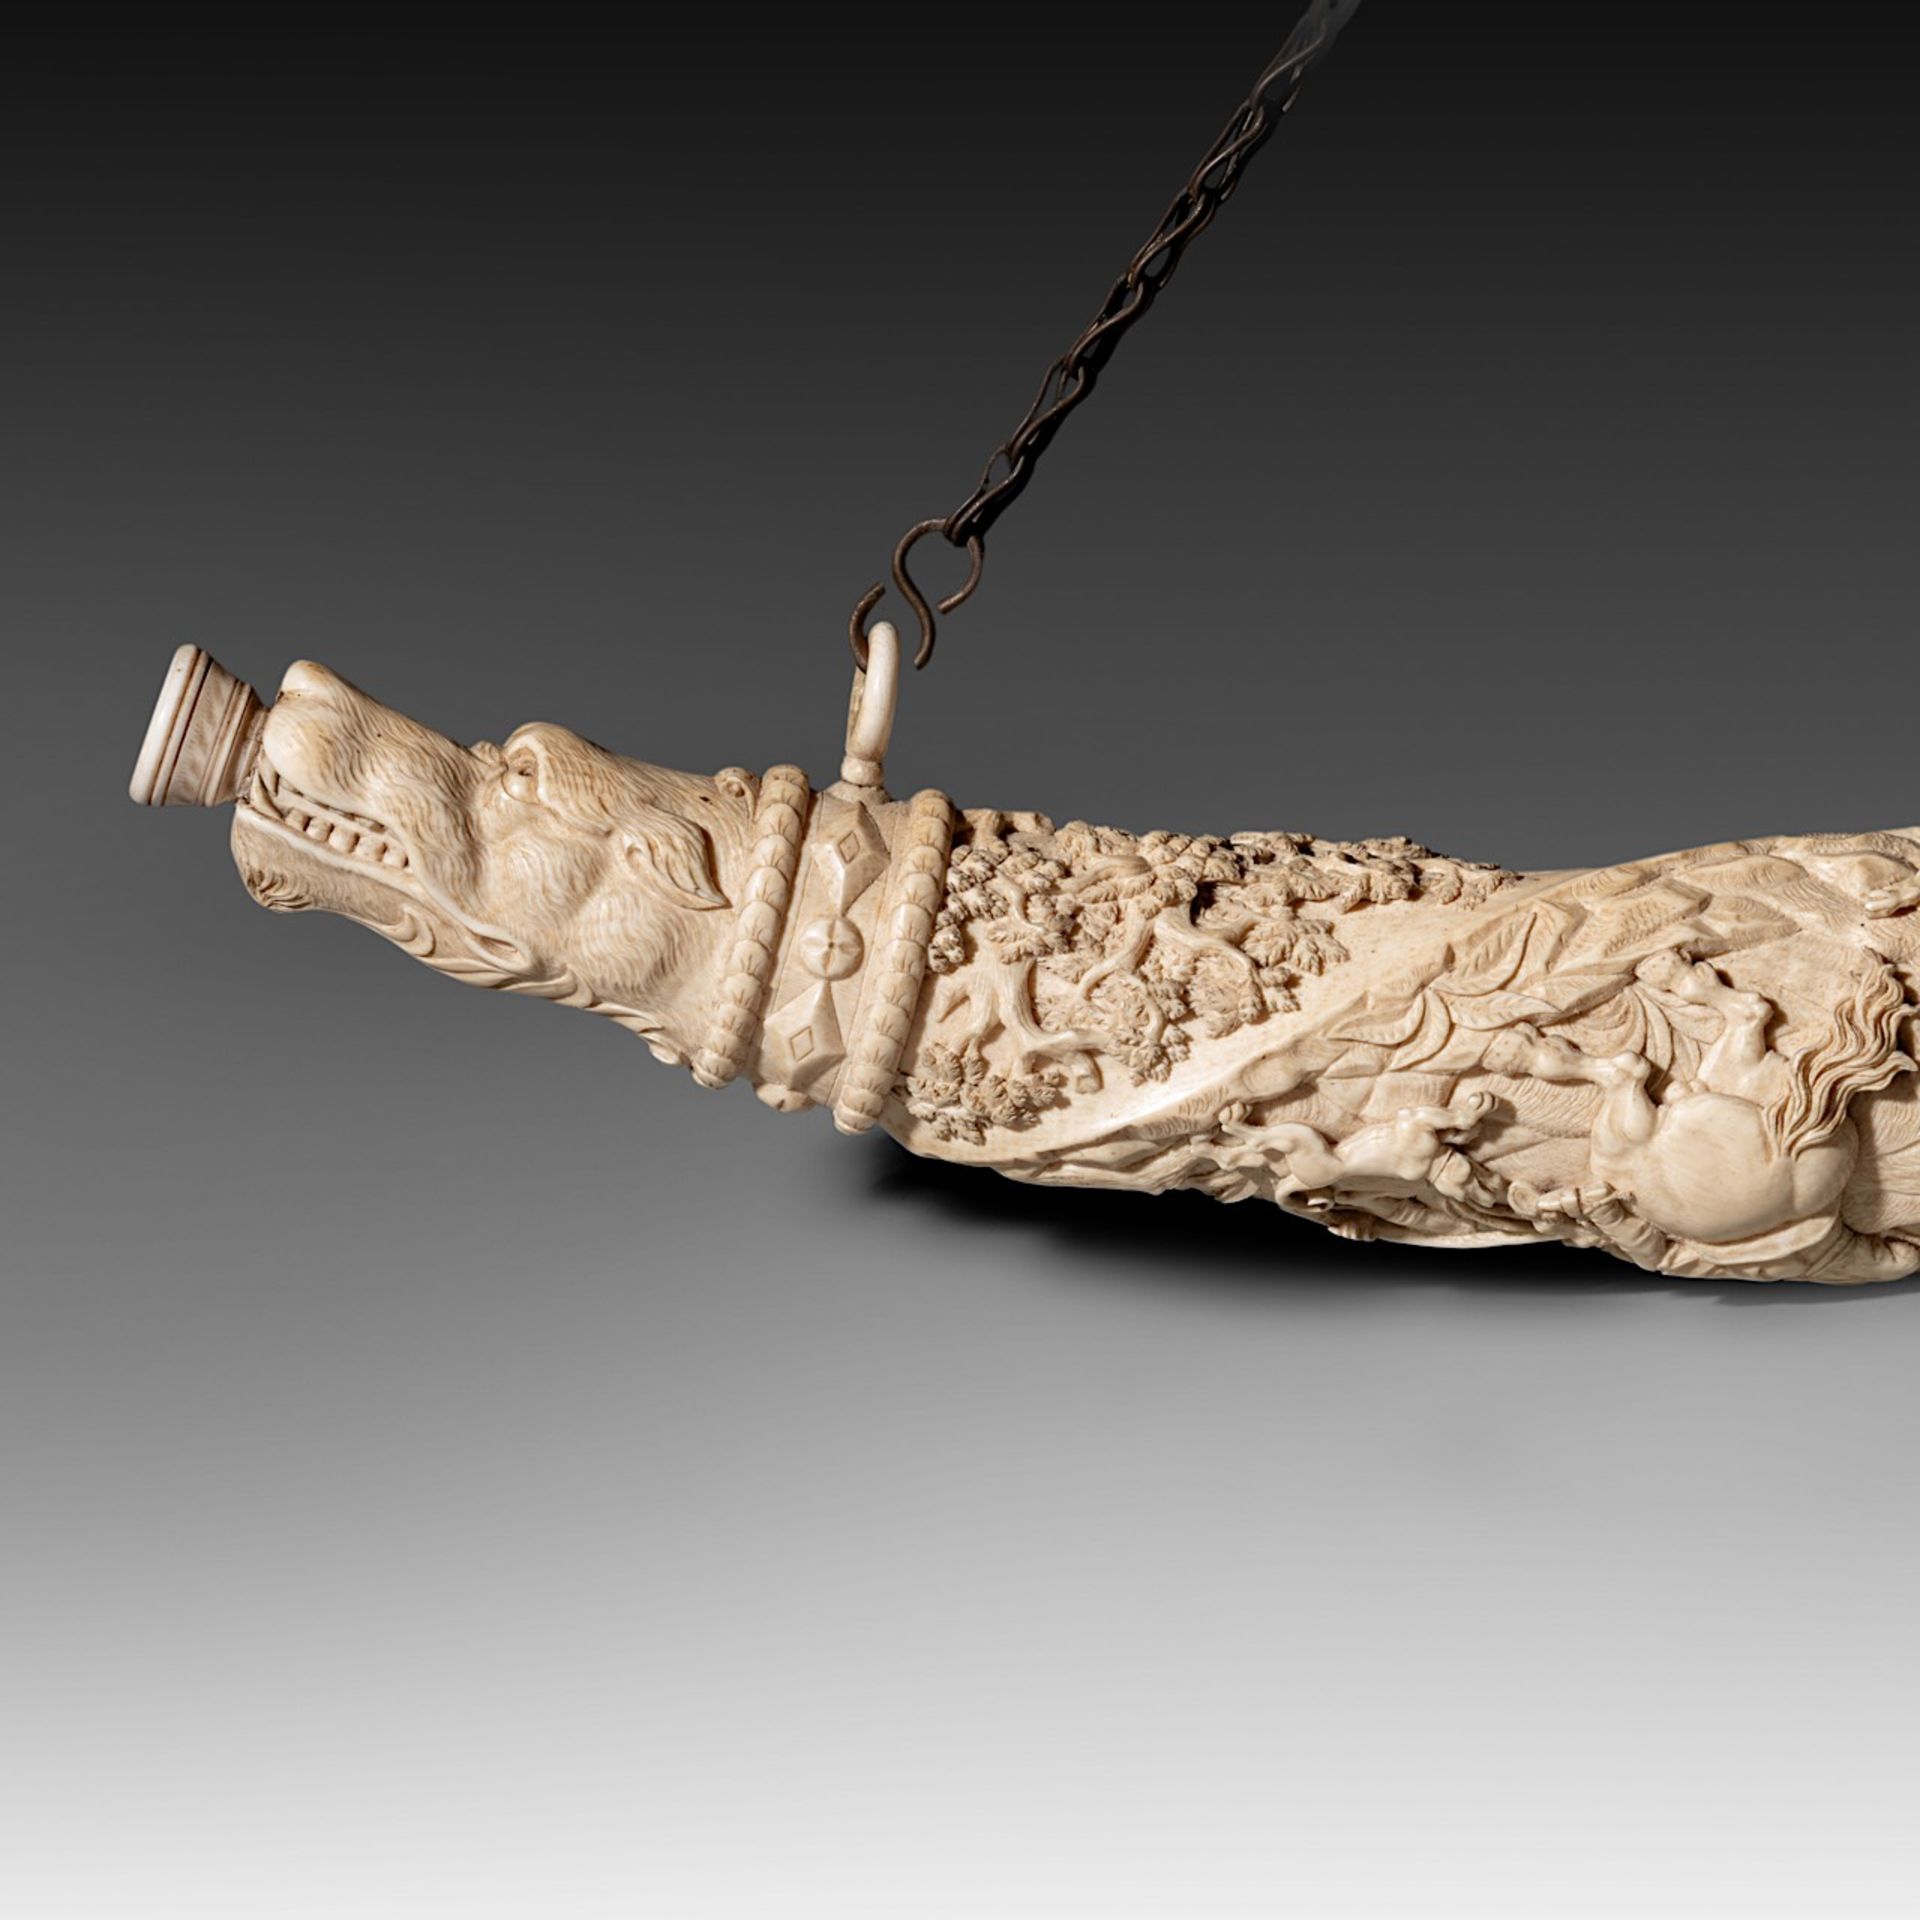 A 19th-century ivory hunting horn, last quarter 19th century, W 74,5 cm - 2850 g (+) - Image 8 of 11